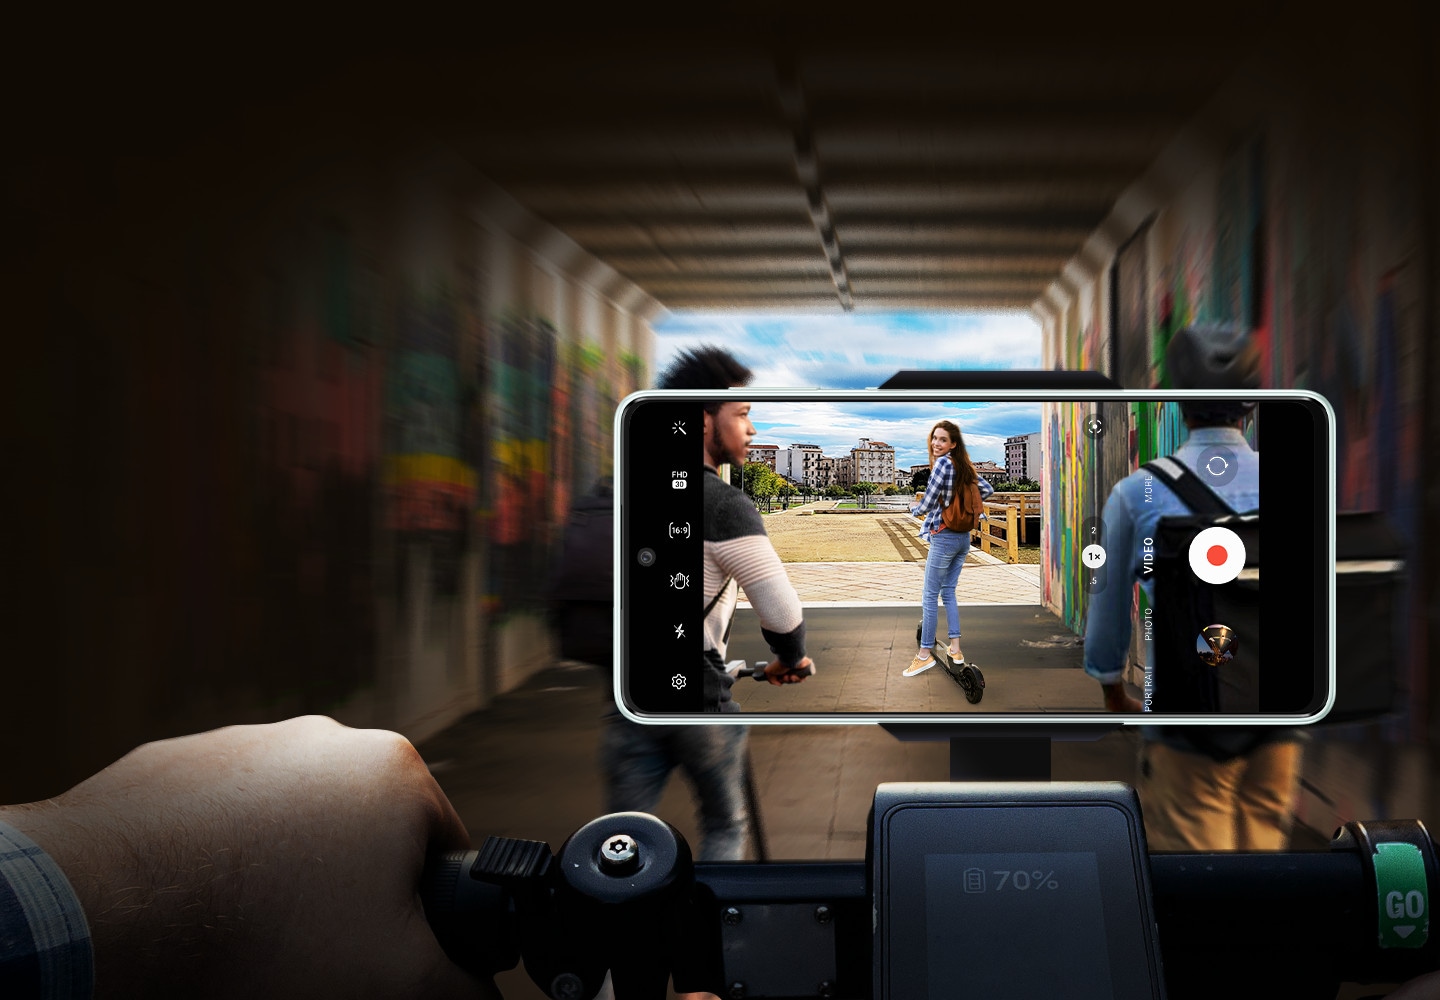 A Galaxy A73 5G device is mounted horizontally onto a bicycle handlebar and shooting a video. While the picture inside the frame clearly shows the electric kickboard riding up front and a woman in looking back at the device, the background image beyond the frame is dark and blurry.